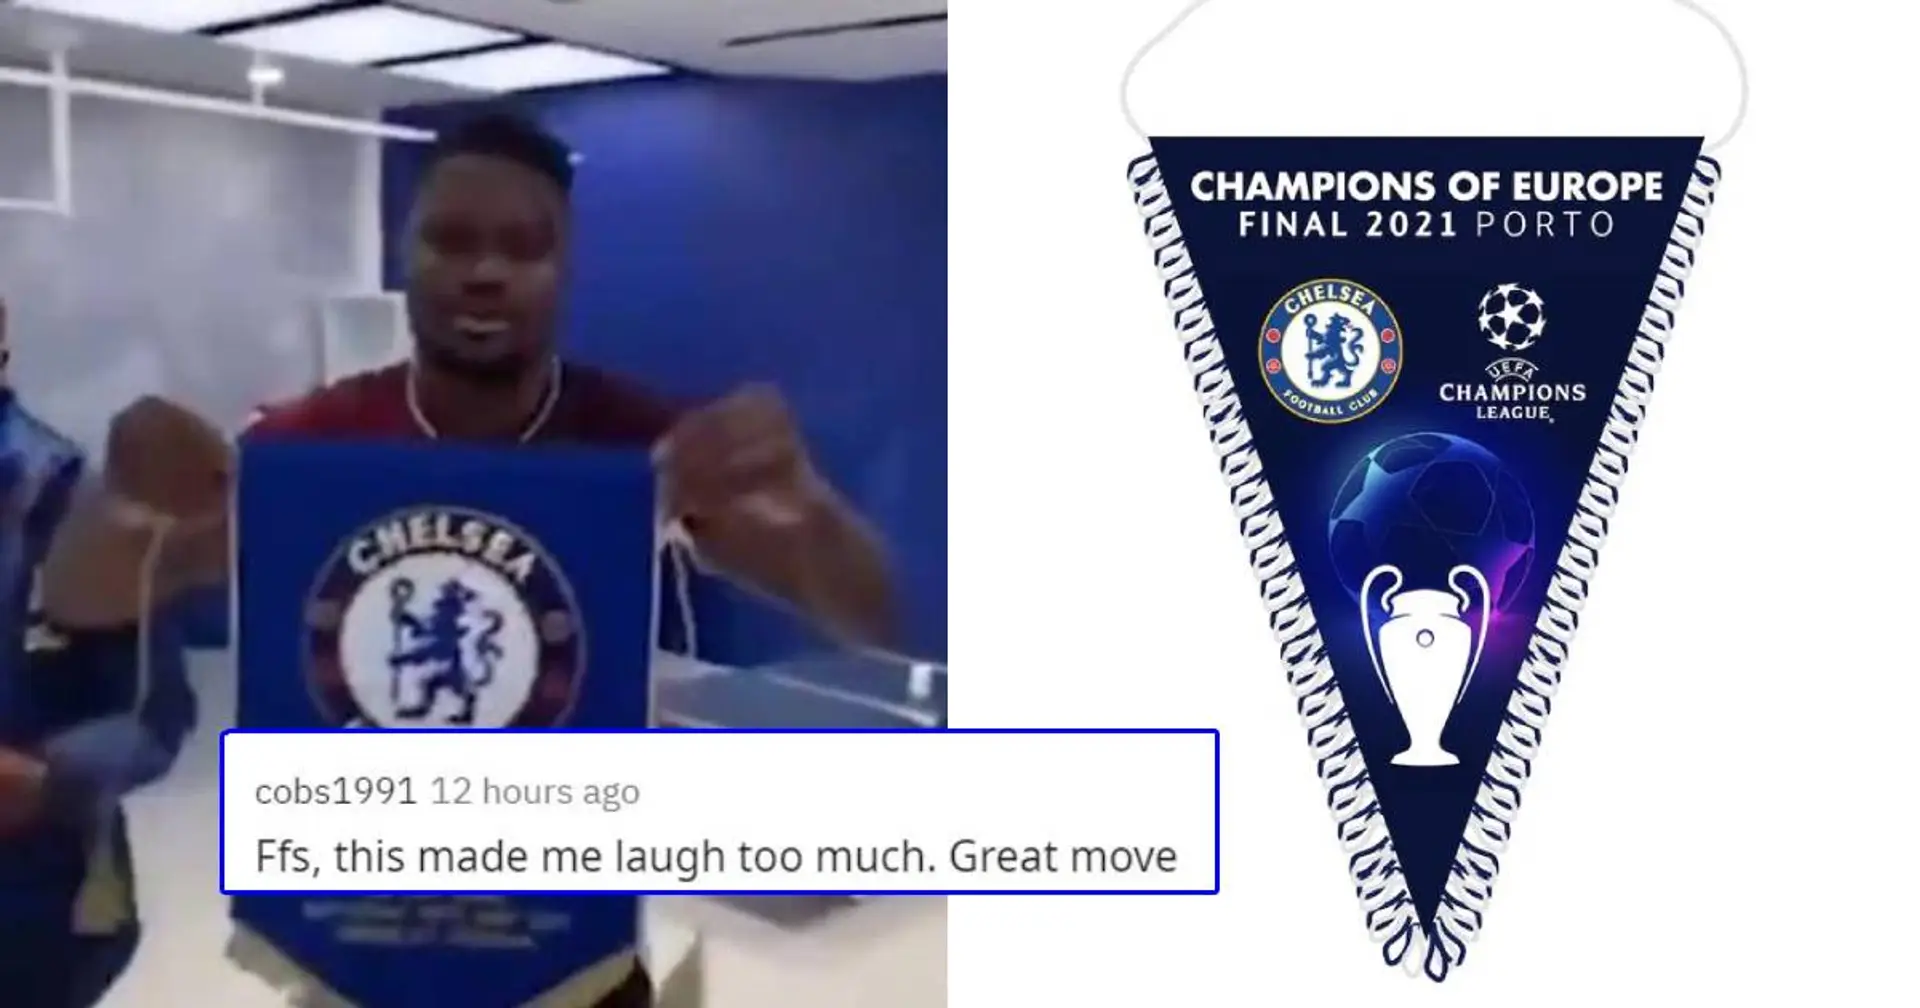 'Real power move': Chelsea fan takes ultimate revenge on Amartey by sending him Champions League pennant